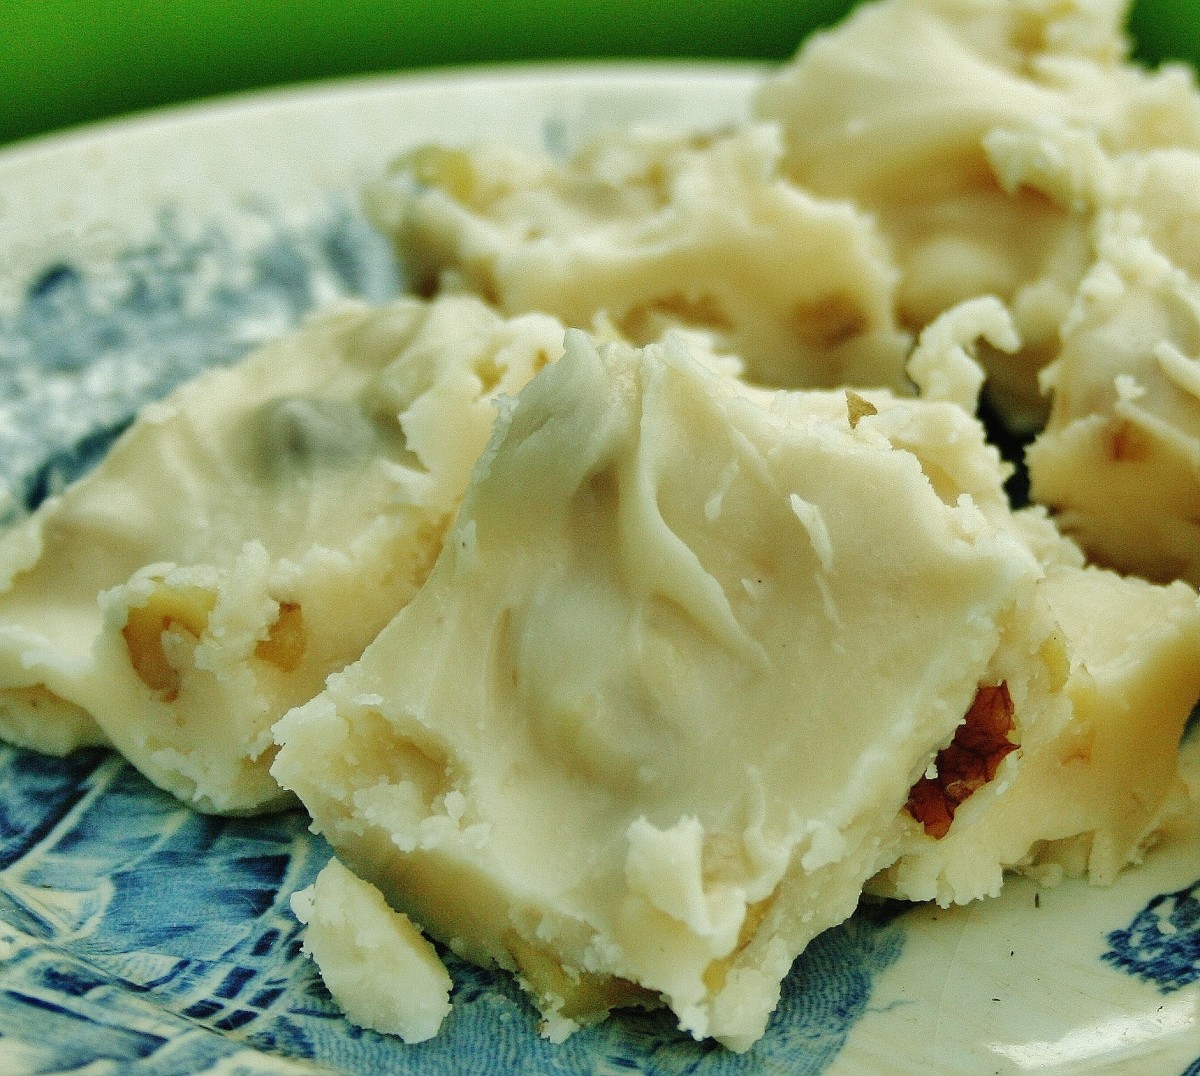 How to Make Old-Fashioned Sour Cream Fudge